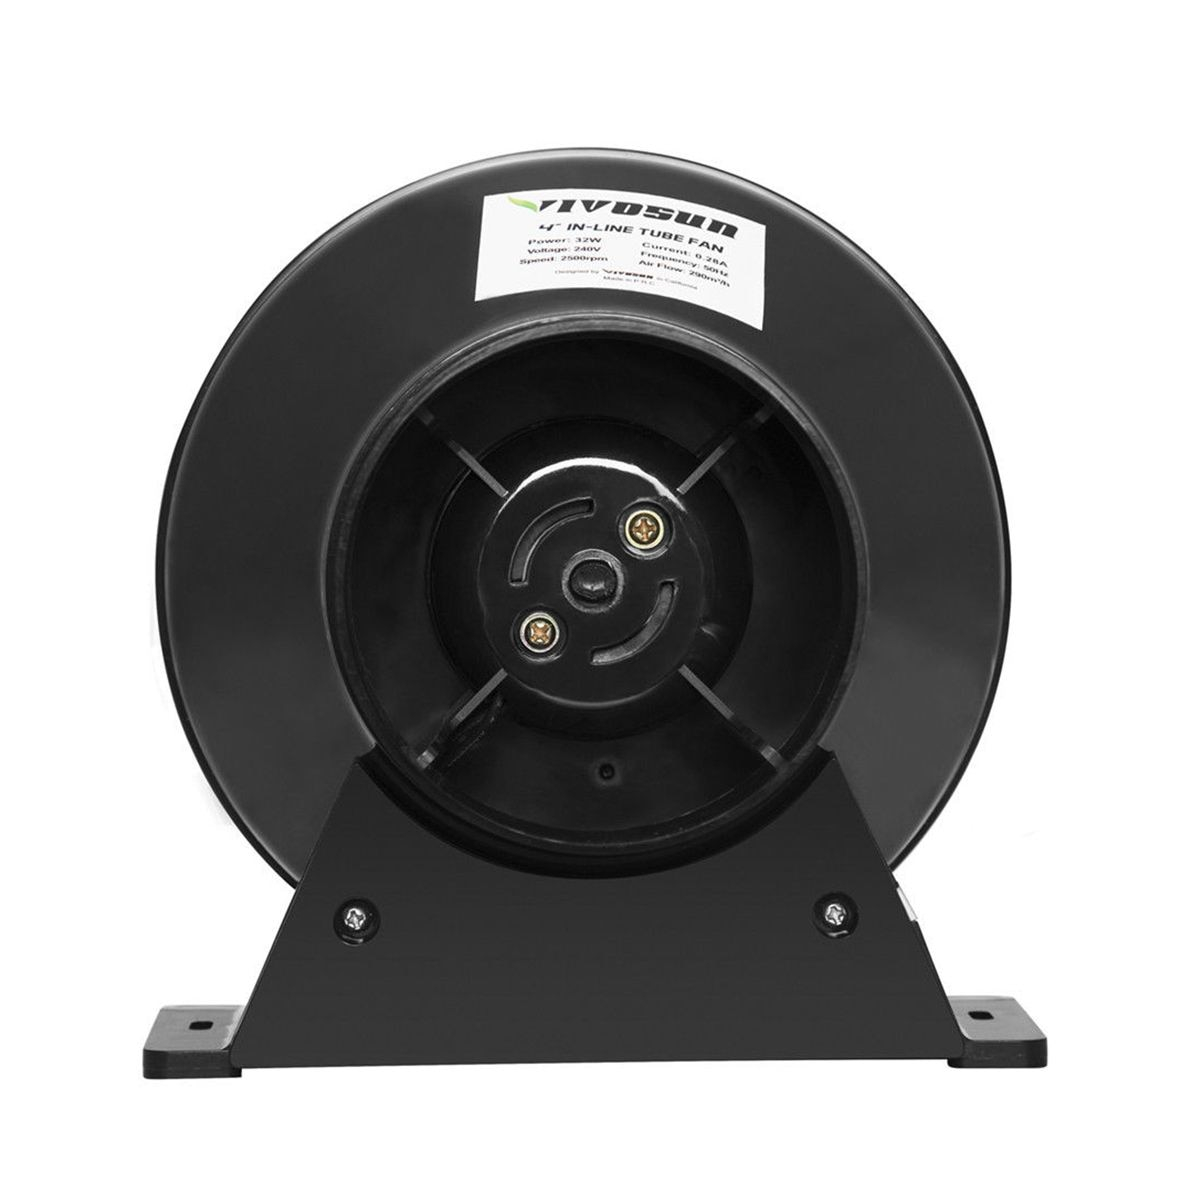 Us 2846 46 Off4 Inch Exhaust Fan 220v Inline Duct Extractor Air Booster Fan Ventilation Exhaust Air Blower Wall Ventilator Fan Home within measurements 1200 X 1200